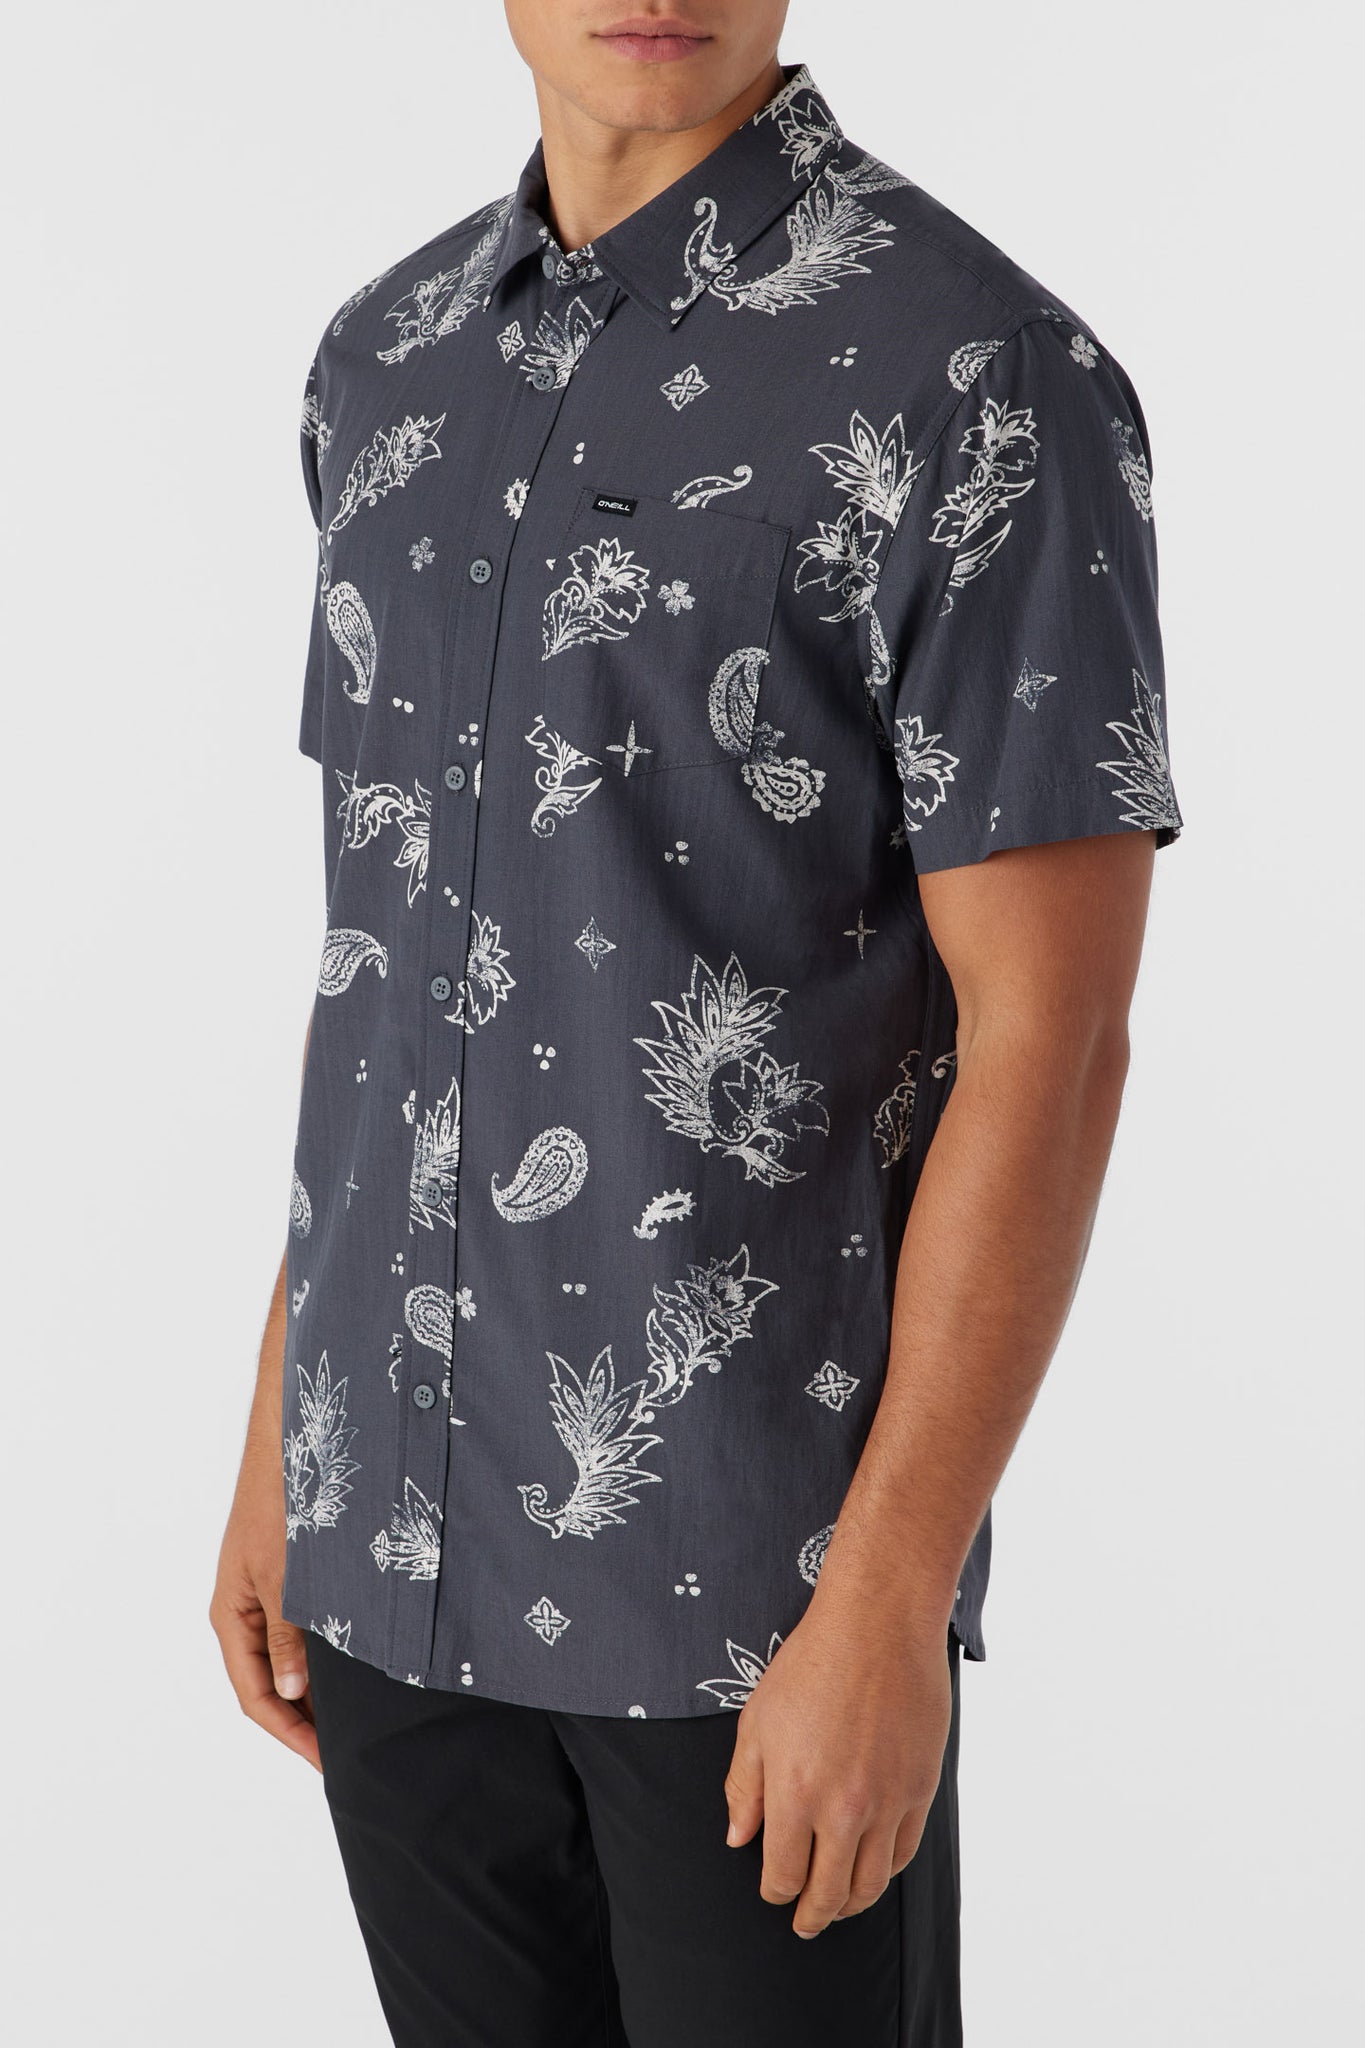 OASIS ECO STANDARD FIT SHIRT